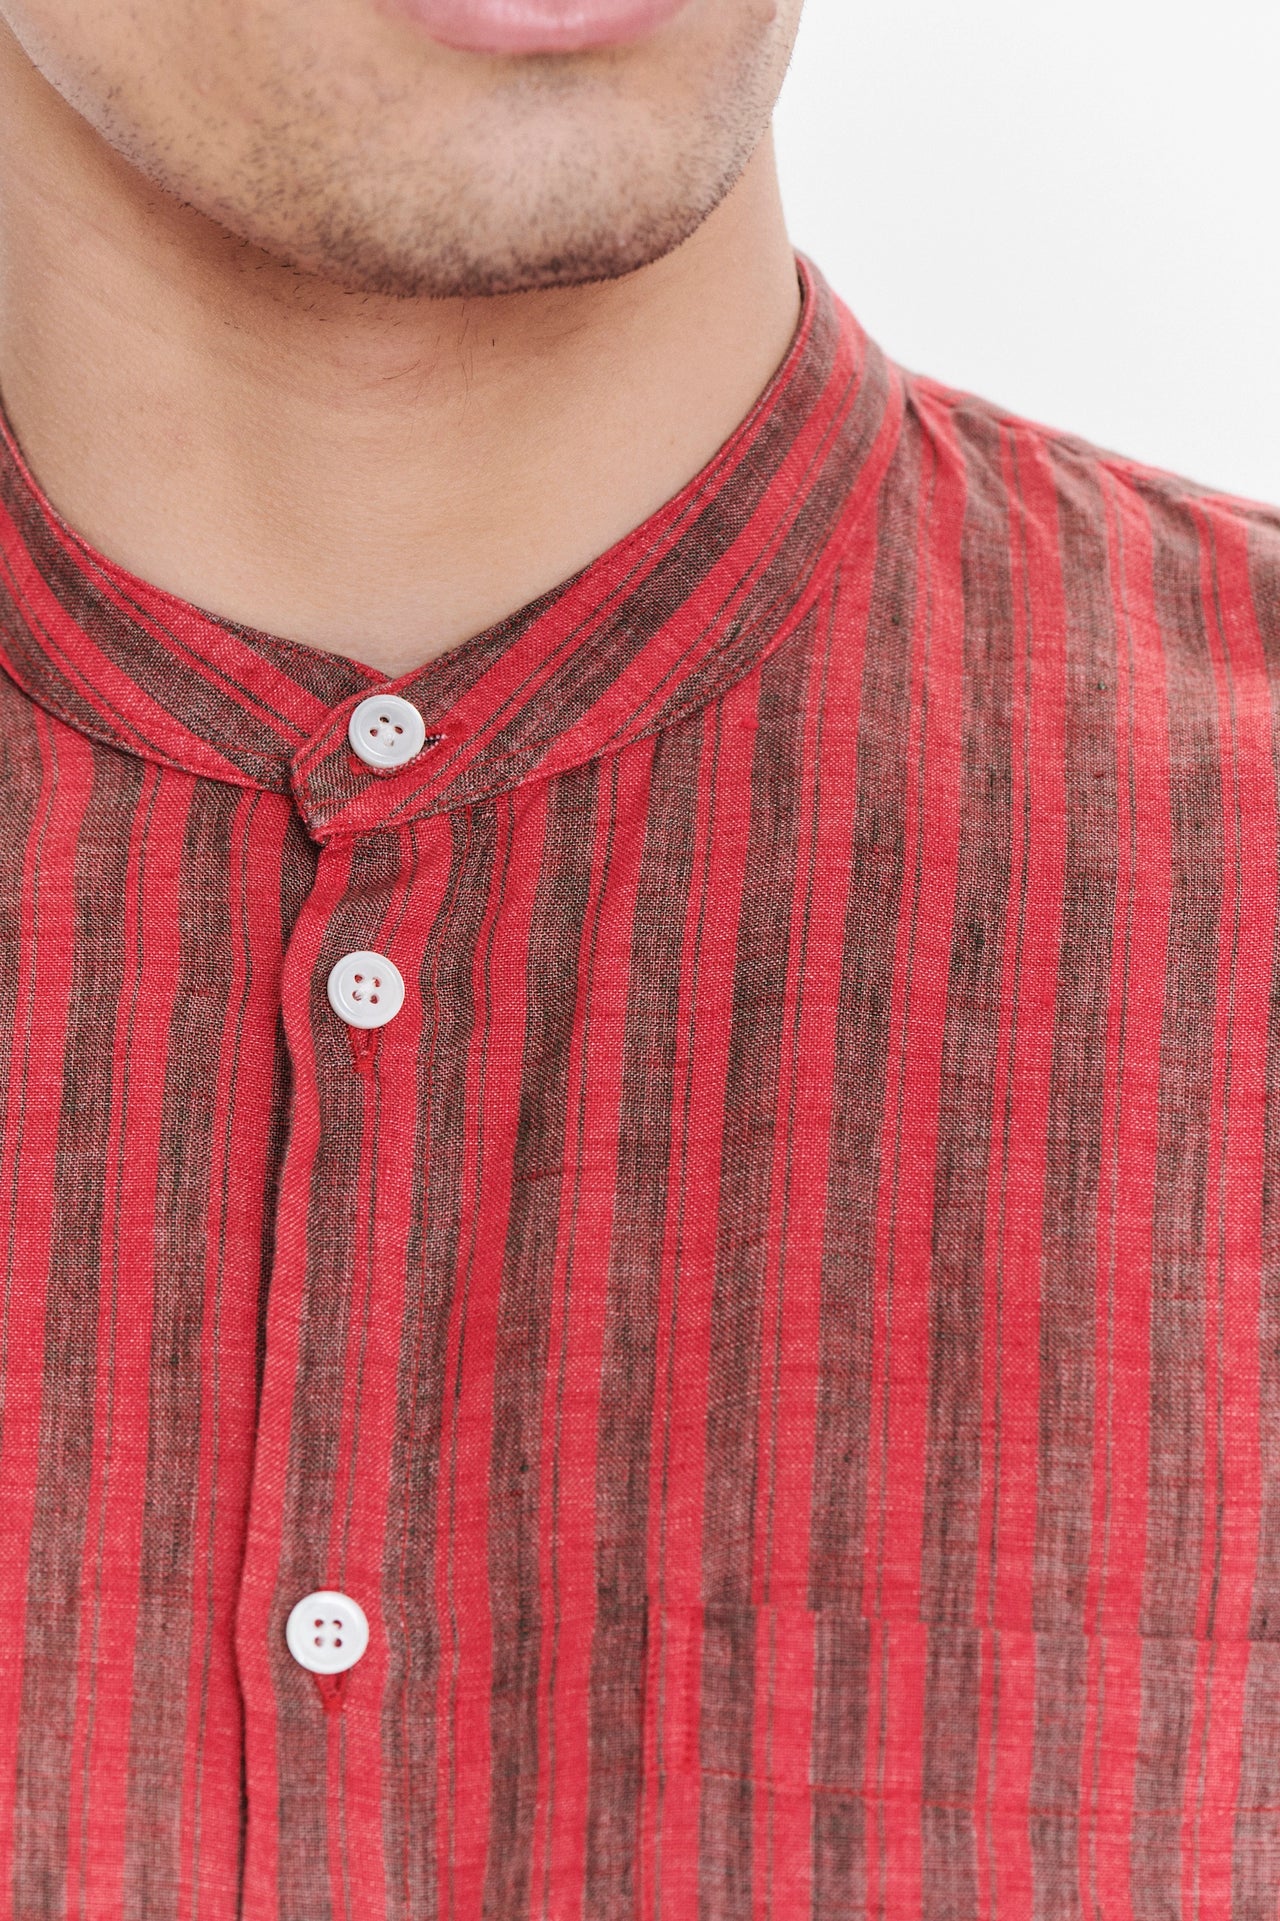 Zen Shirt in a Red and Brown Striped Italian Linen